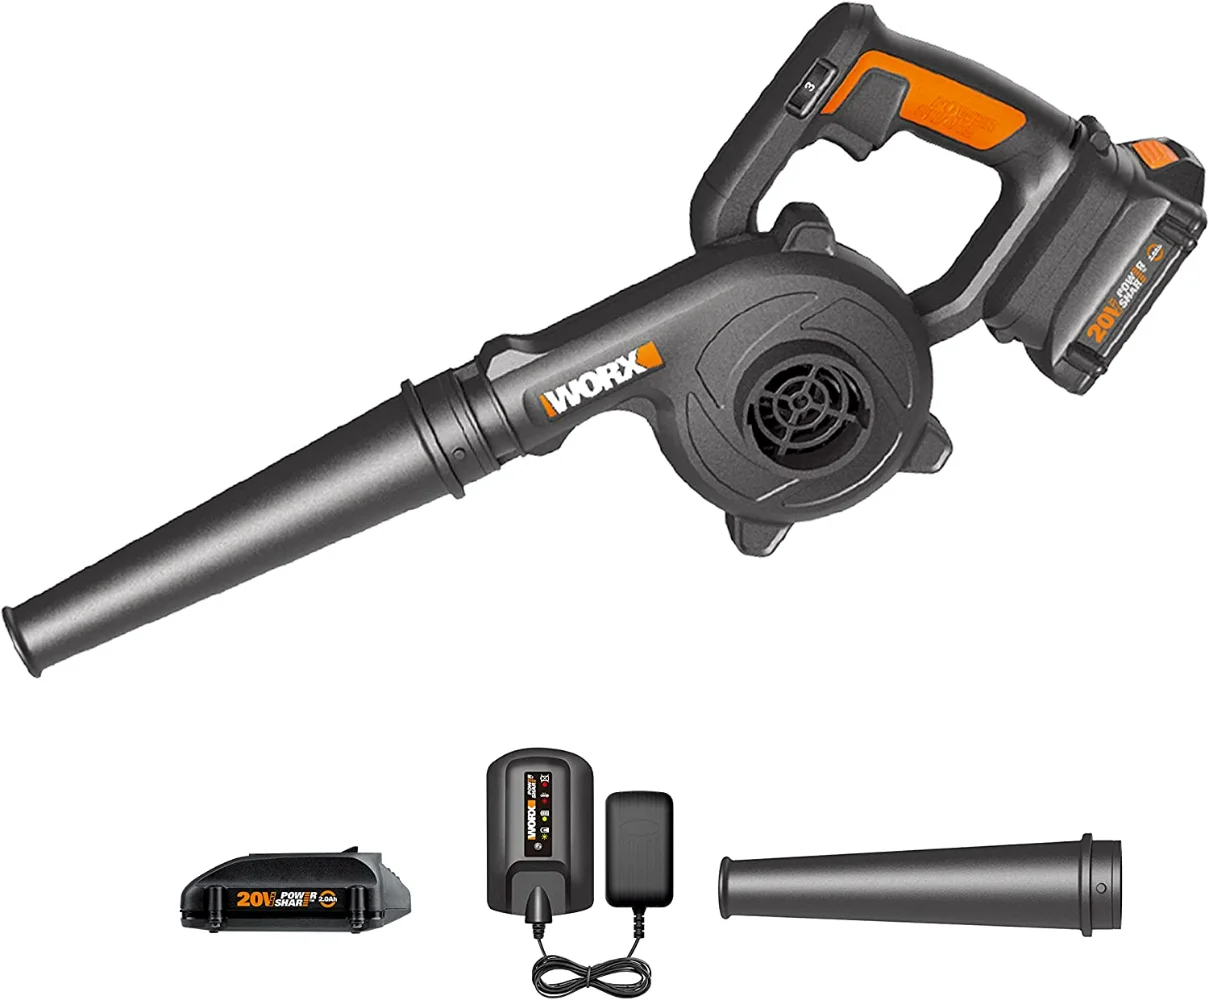 

WORX 20V Cordless Jobsite Blower WX094L Compact Leaf Blower for Jobsite Garage Yards，2.0Ah Battery & Charger Included